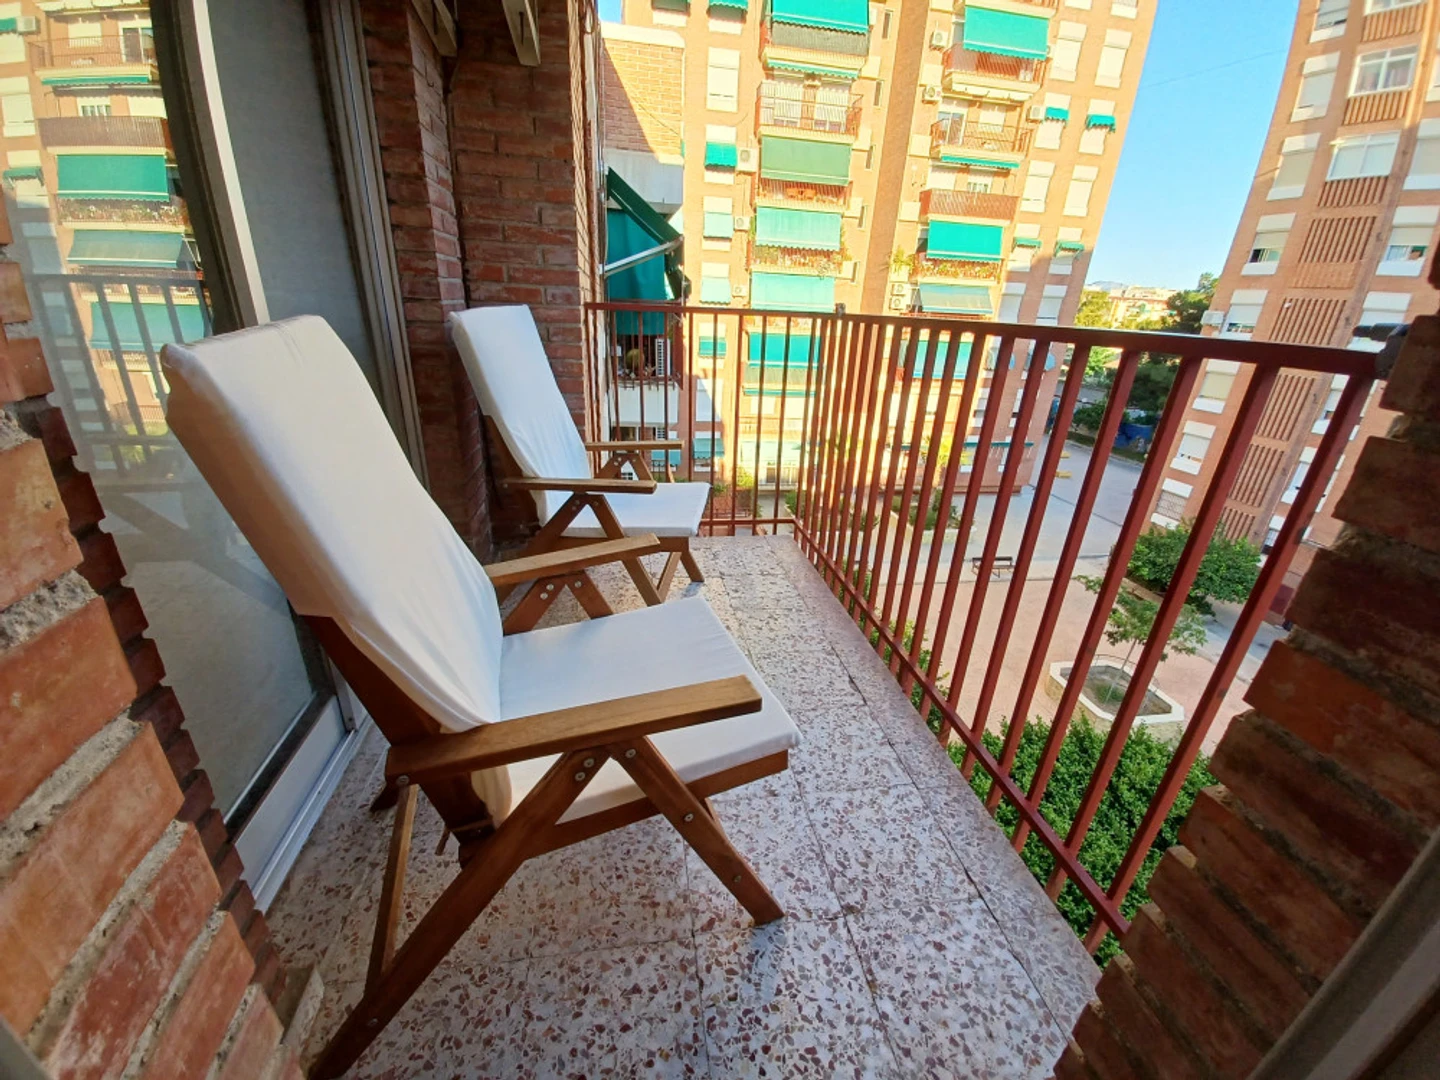 Renting rooms by the month in Murcia